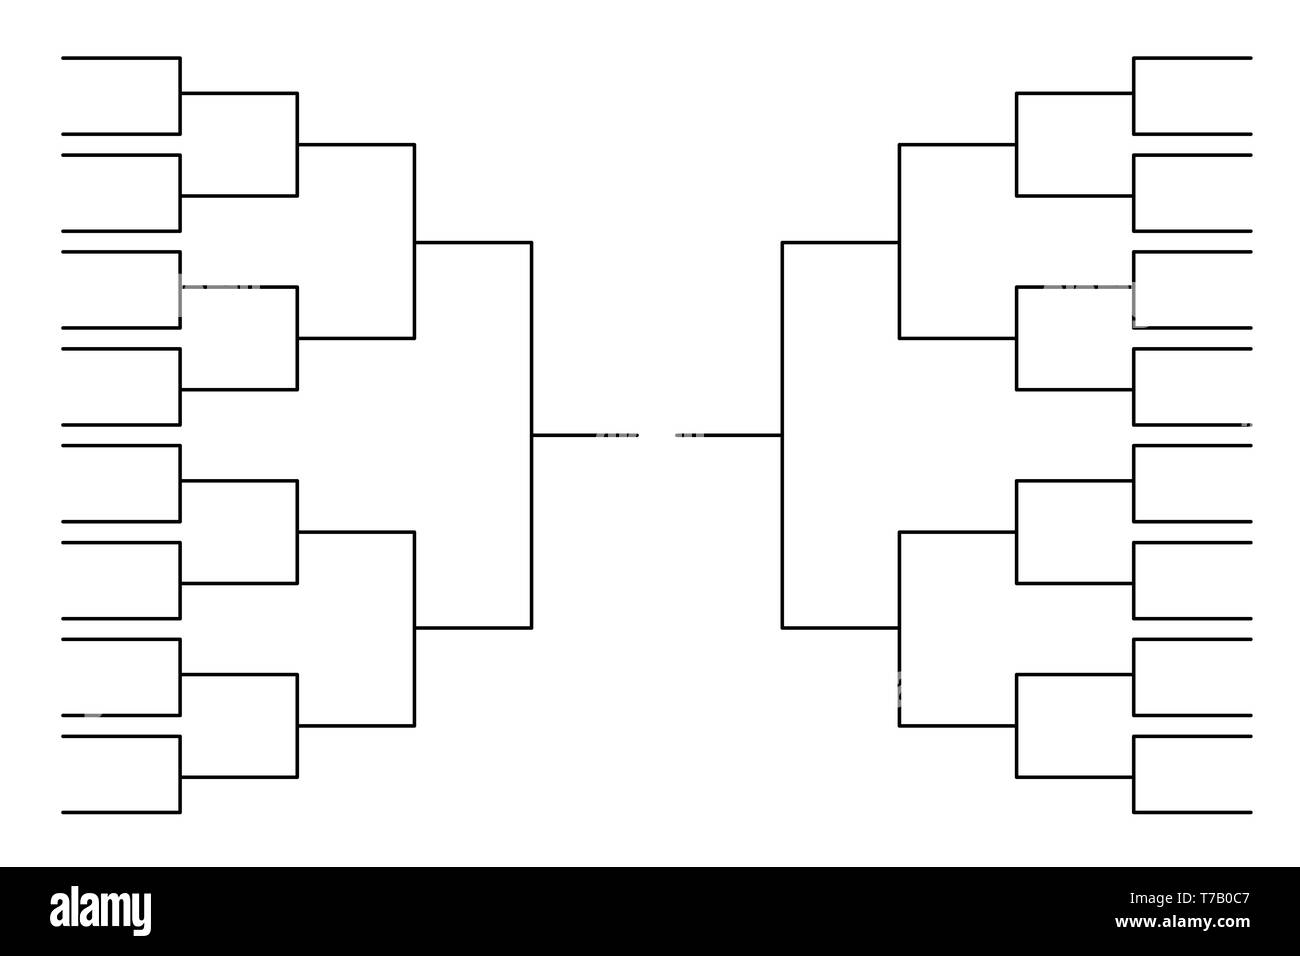 Simple black tournament bracket template for 32 teams isolated on white Stock Vector